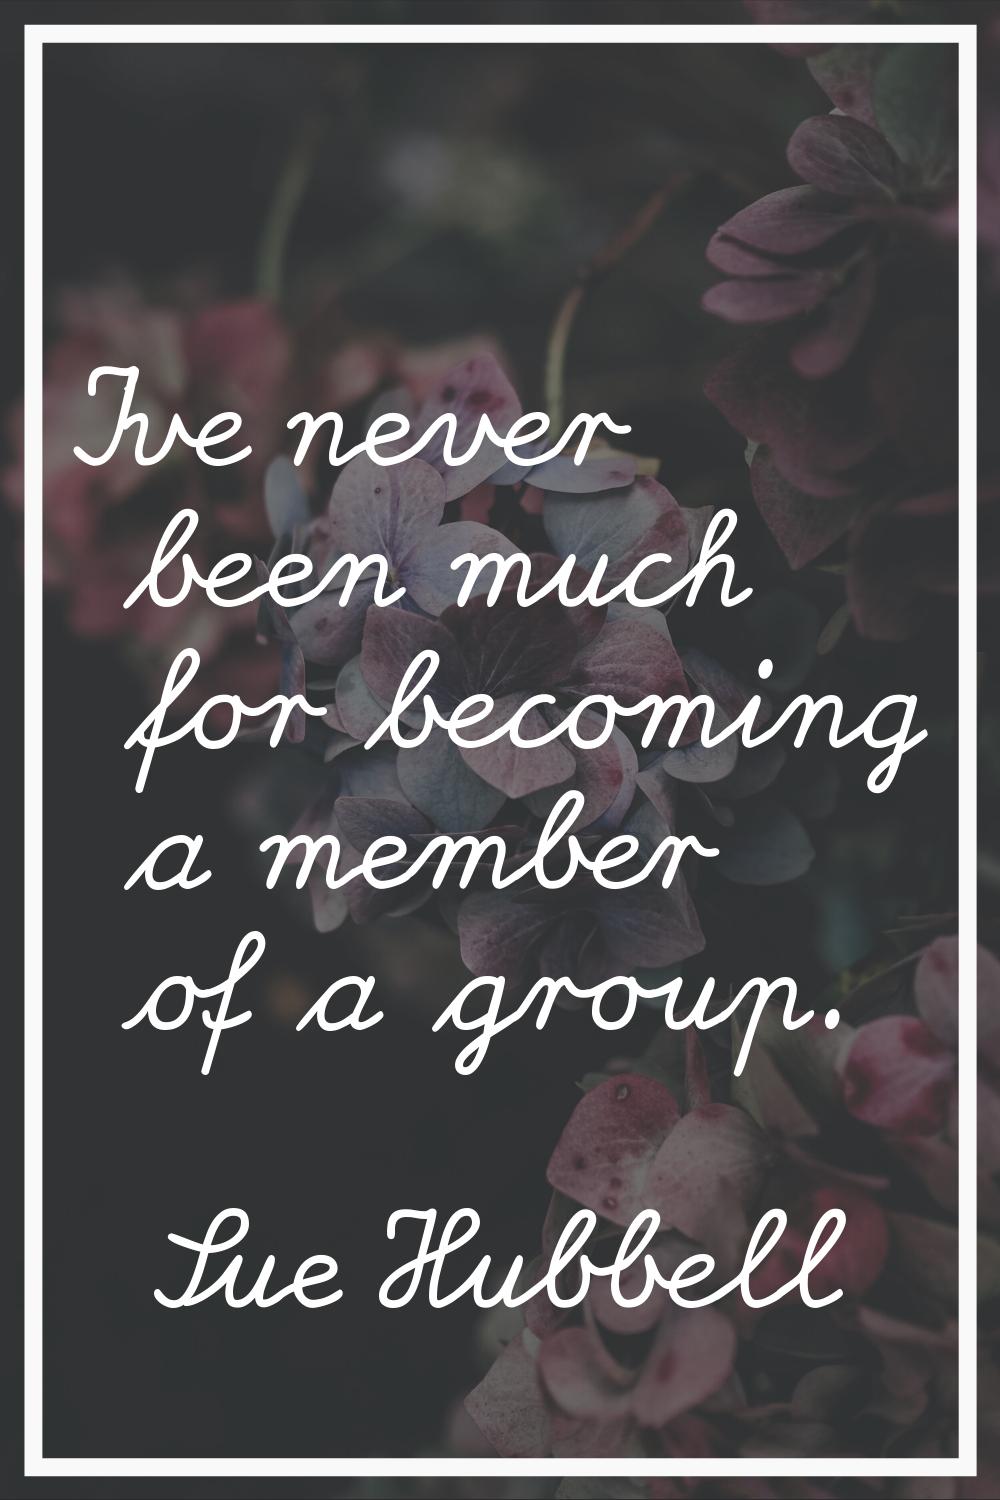 I've never been much for becoming a member of a group.